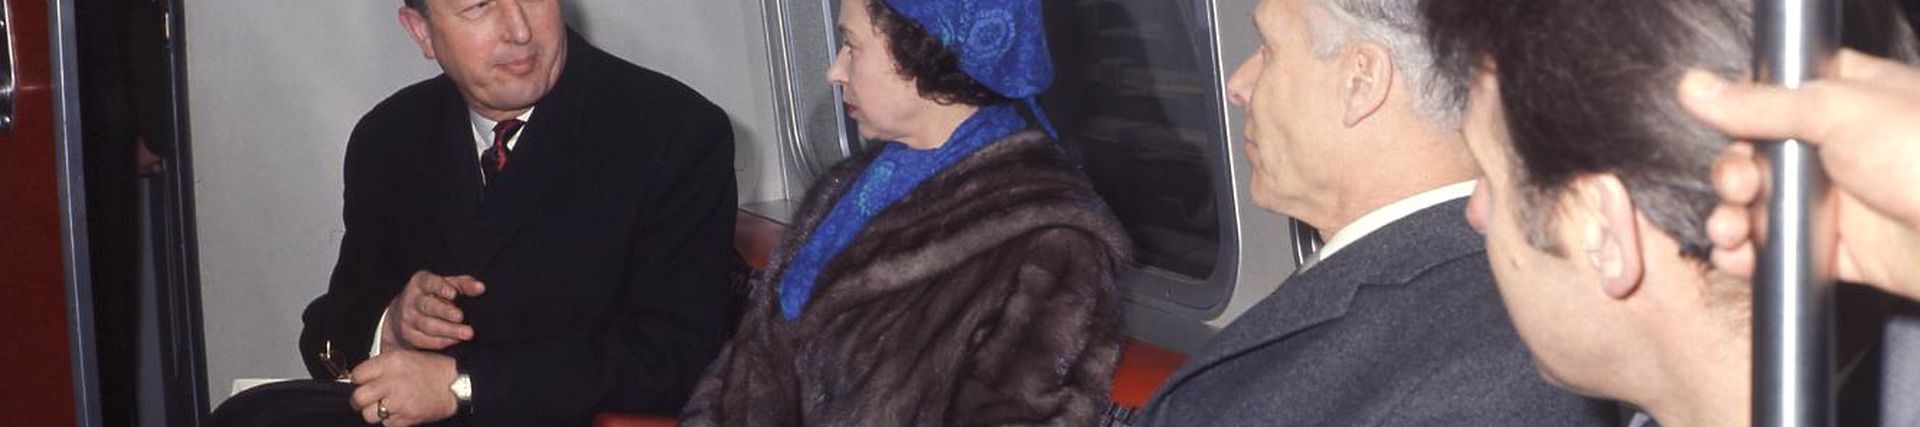 Royal opening of the Victoria Line, by LT Advertising and Publicity, March 1969